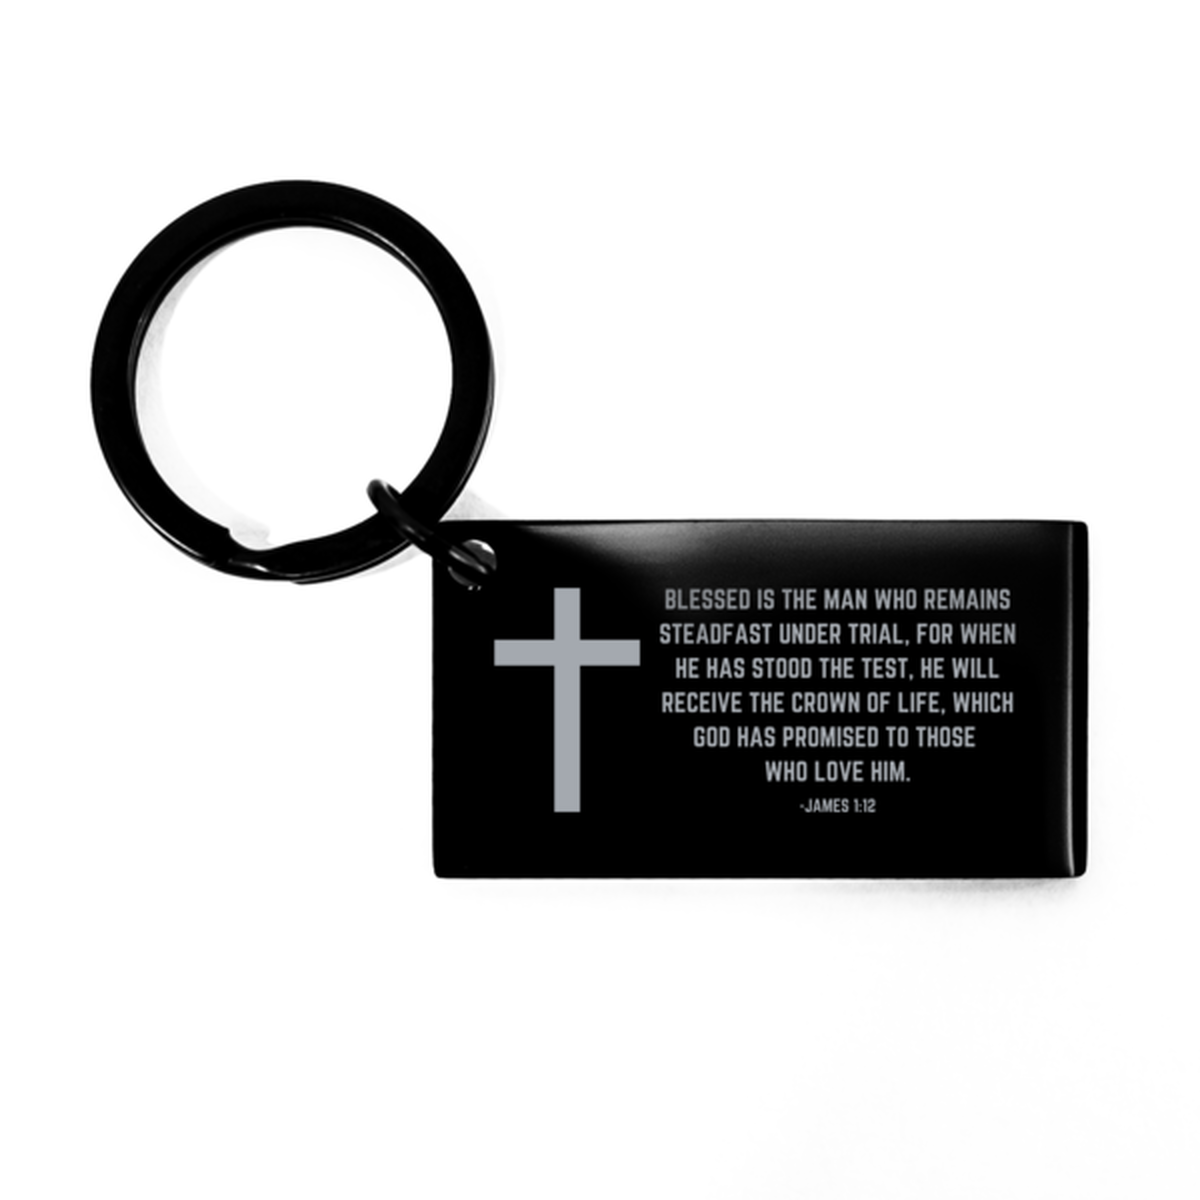 Baptism Gifts For Teenage Boys Girls, Christian Bible Verse Black Keychain, Blessed is the man who remains, Confirmation Gifts, Bible Verse Keyring for Son, Godson, Grandson, Nephew